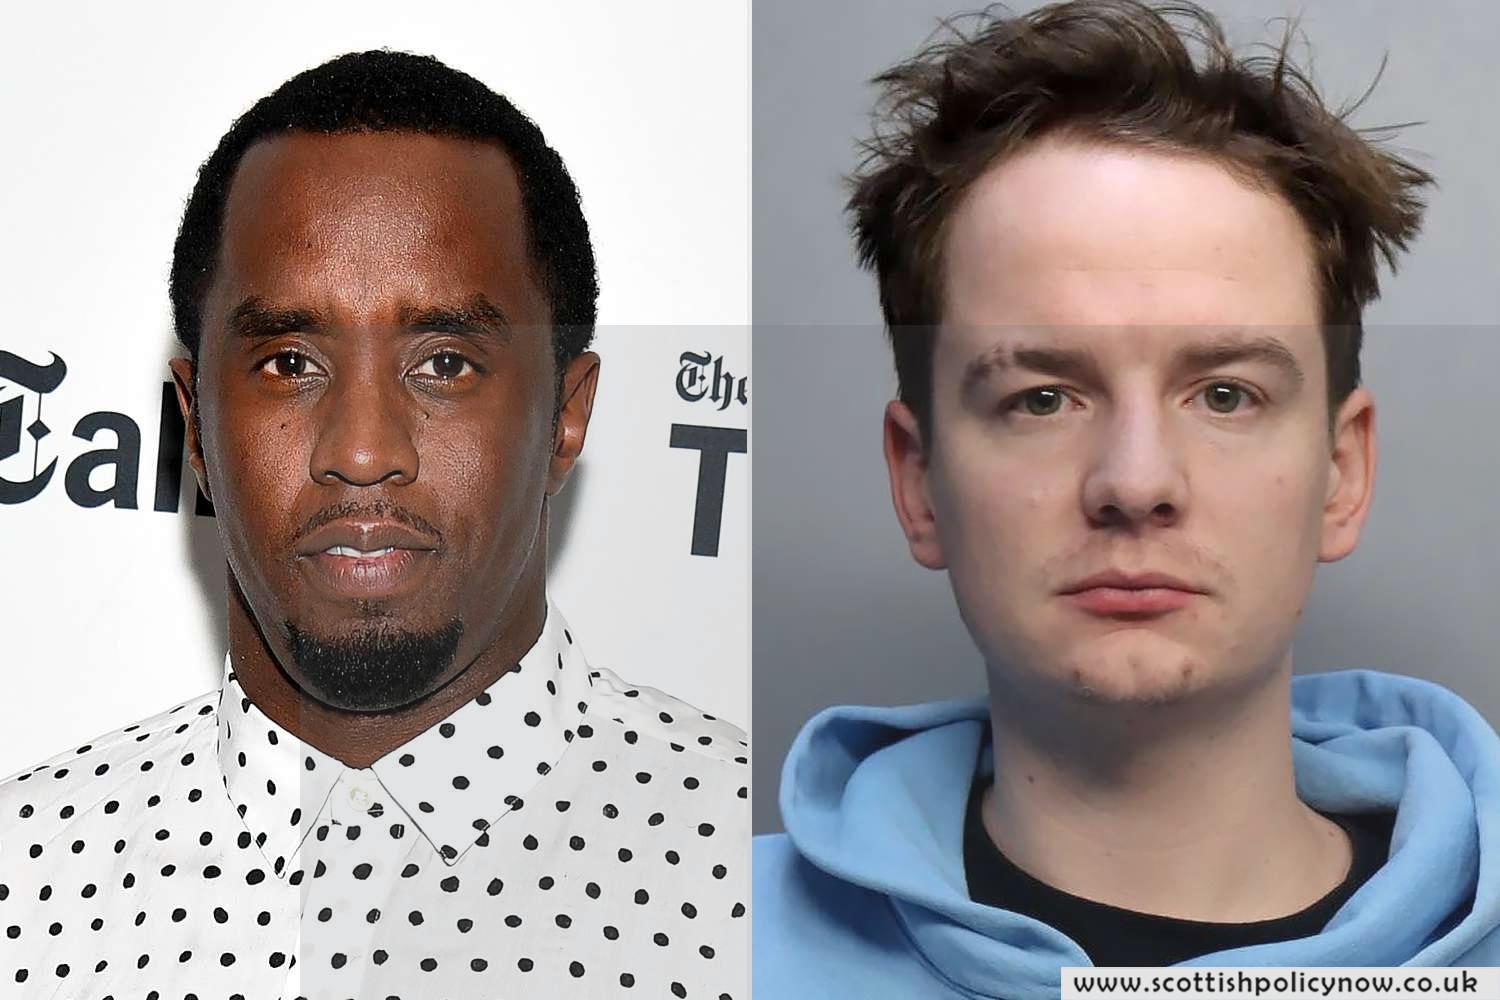 Brendan Paul, Alleged Drug Mule for Sean ‘Diddy’ Combs, Faces Felony Cocaine Possession Charges